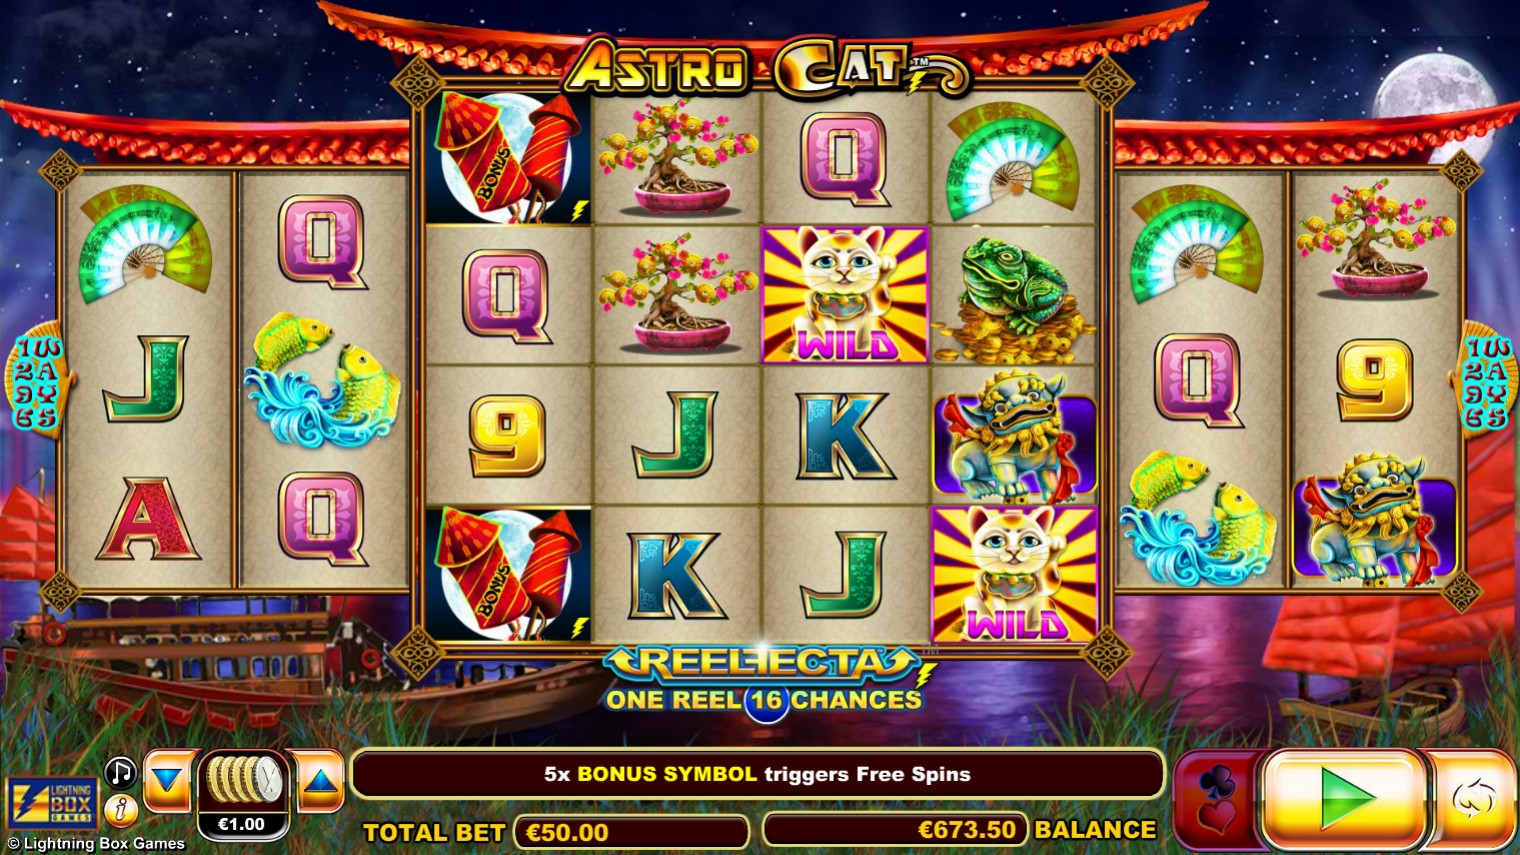 Astro Cat (Astro Cat) from category Slots